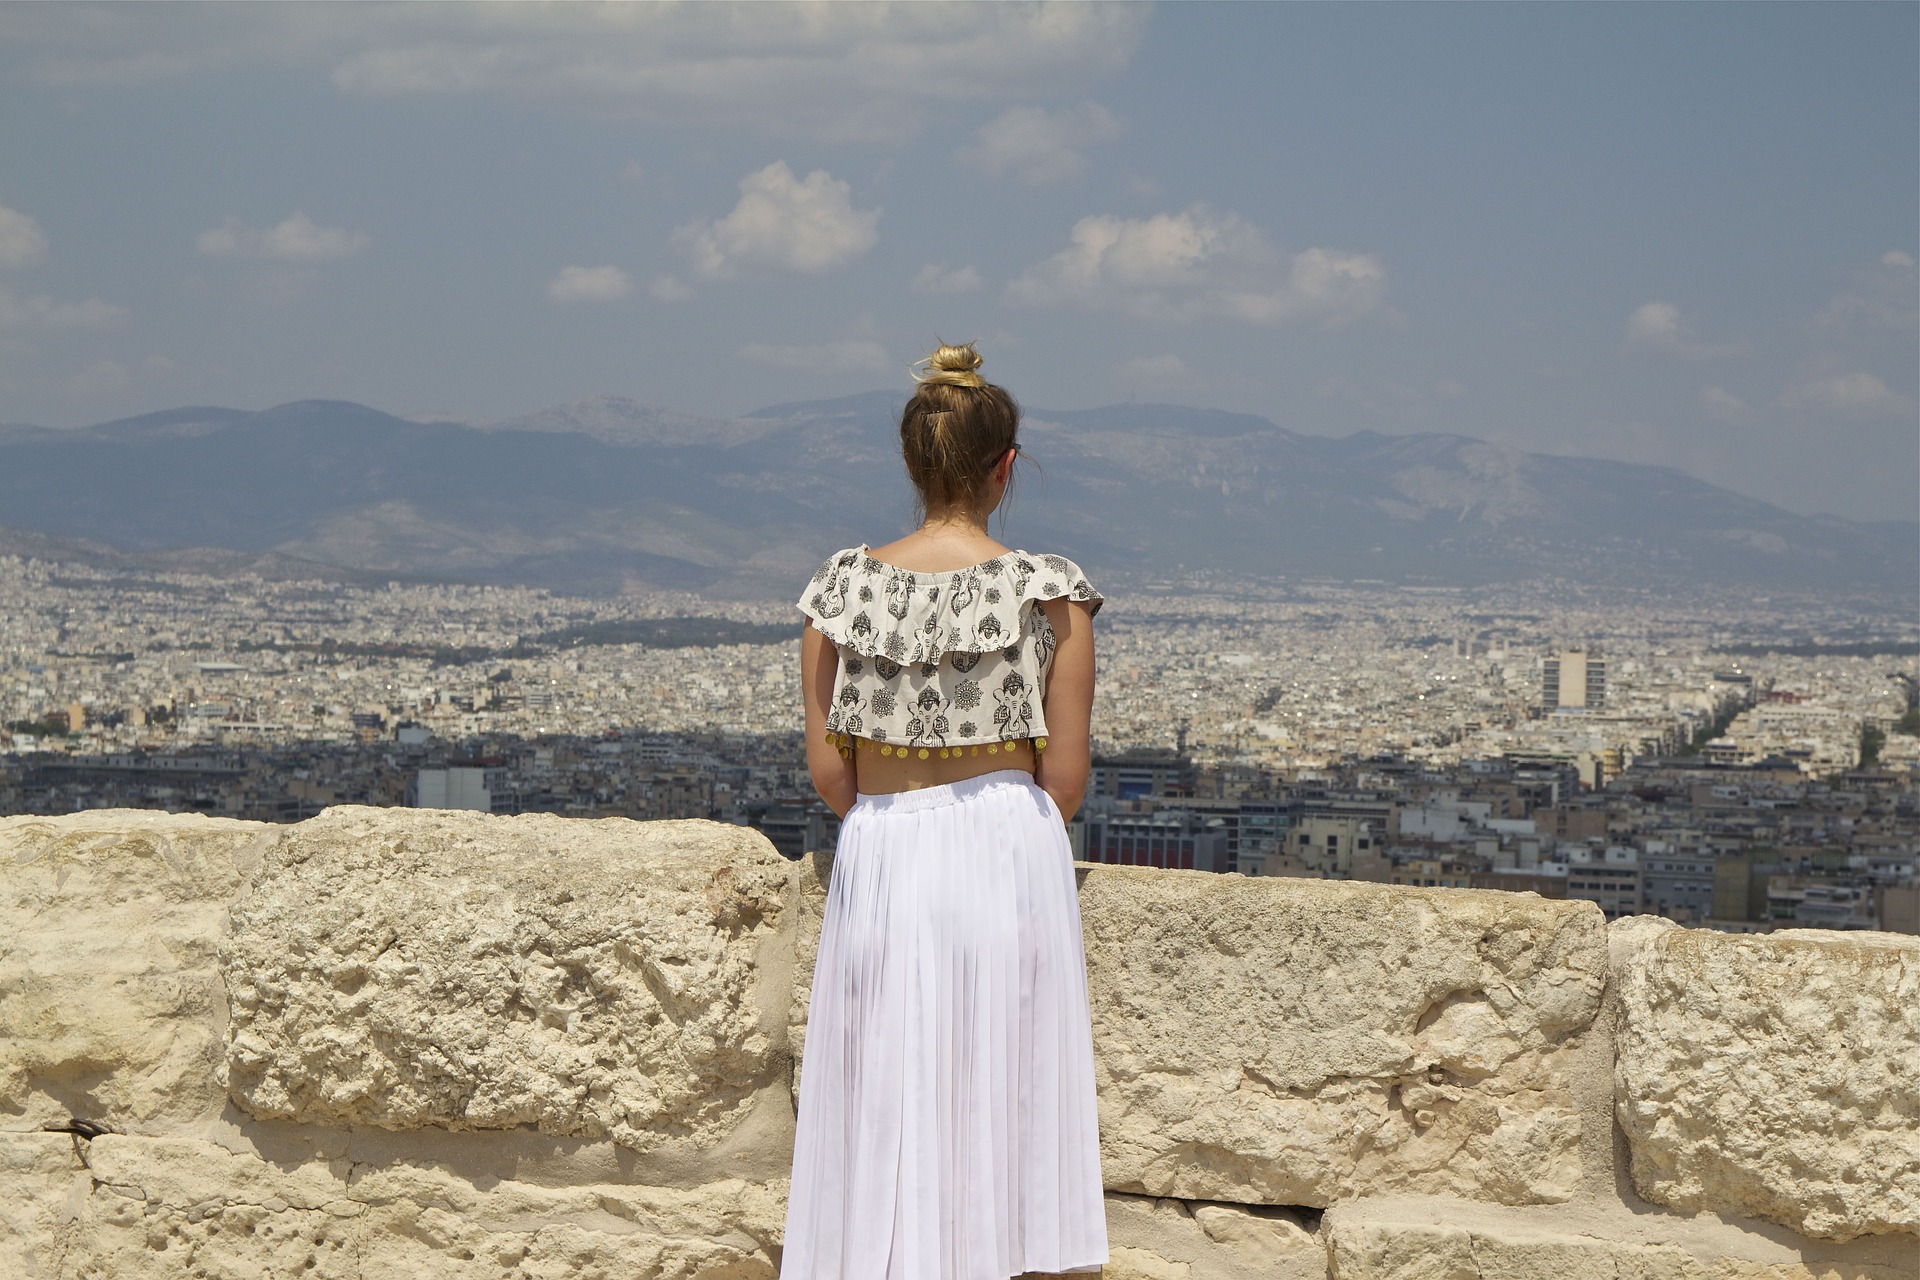 Sightseeing in Athens, Greece